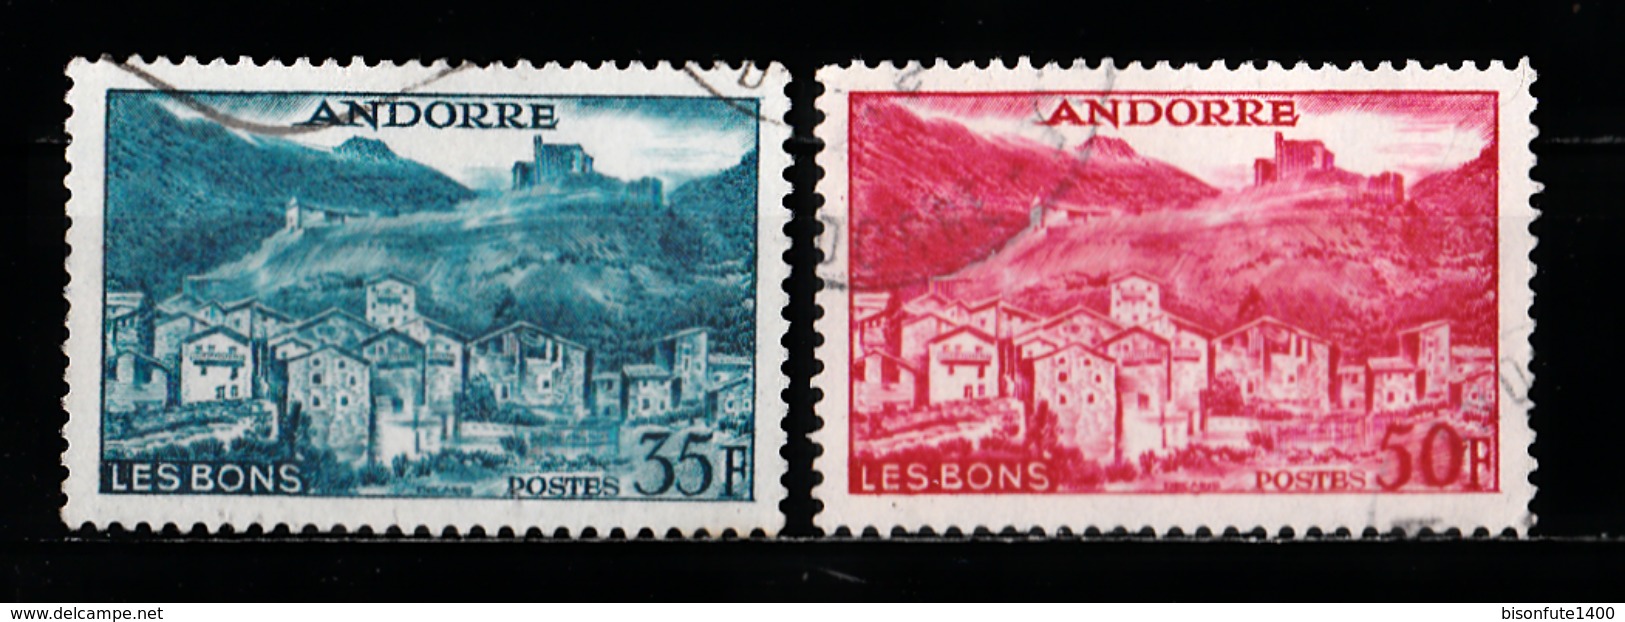 Andorre Français 1955 - 1958 : Timbres Yvert & Tellier N° 138 - 139 - 141 - 143 - 144 - 145 - 146 - 147 - 148 - 149 -... - Used Stamps